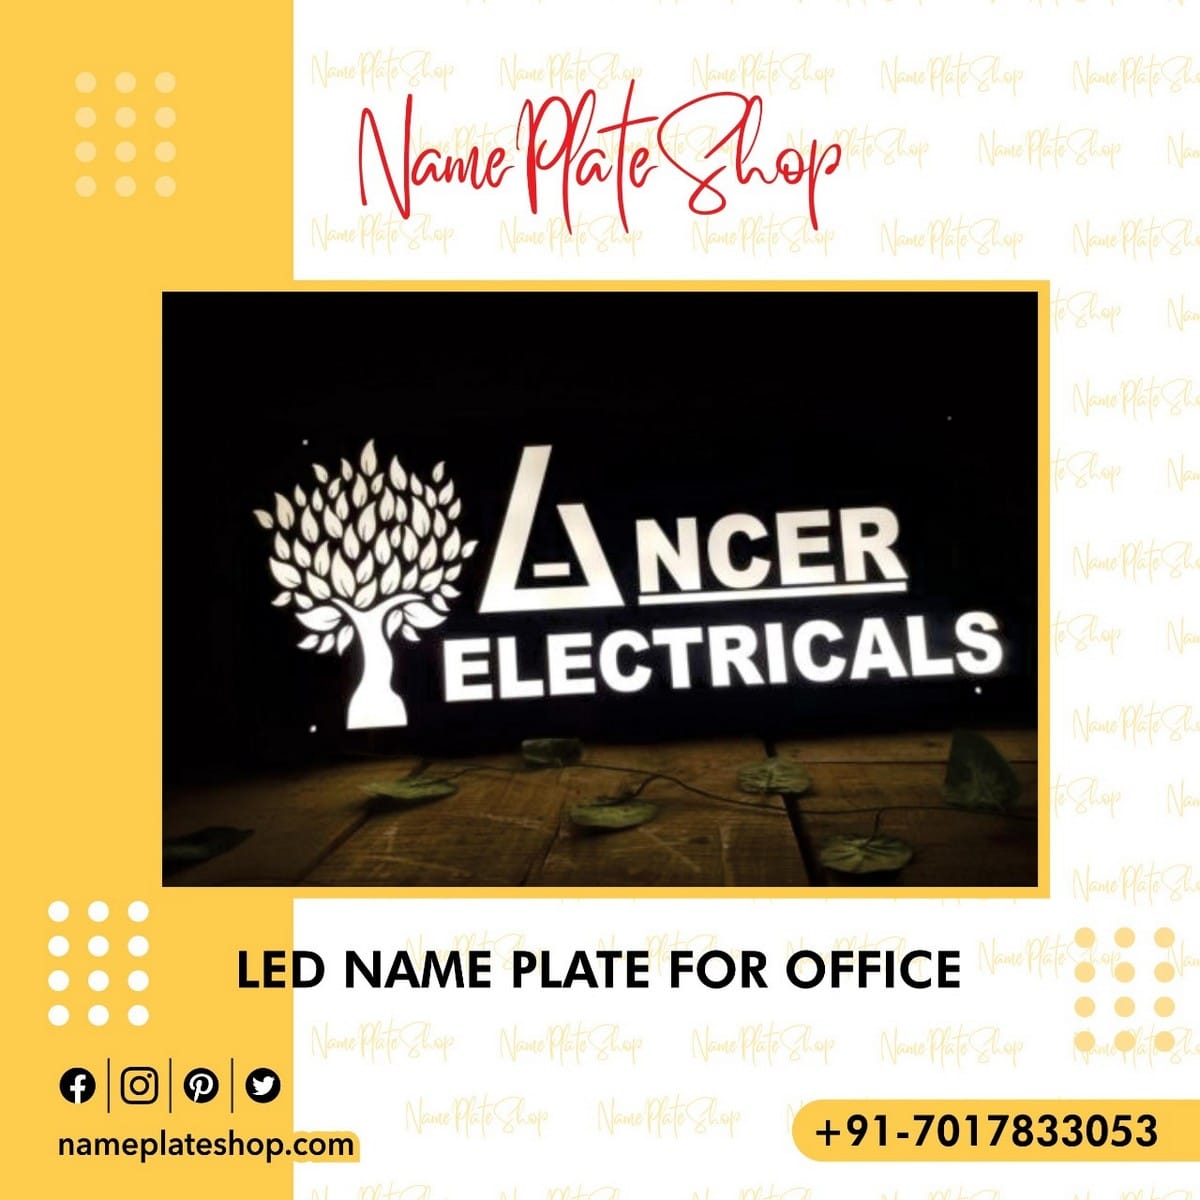 Led Nameplates Nearby Your Place For Your Office